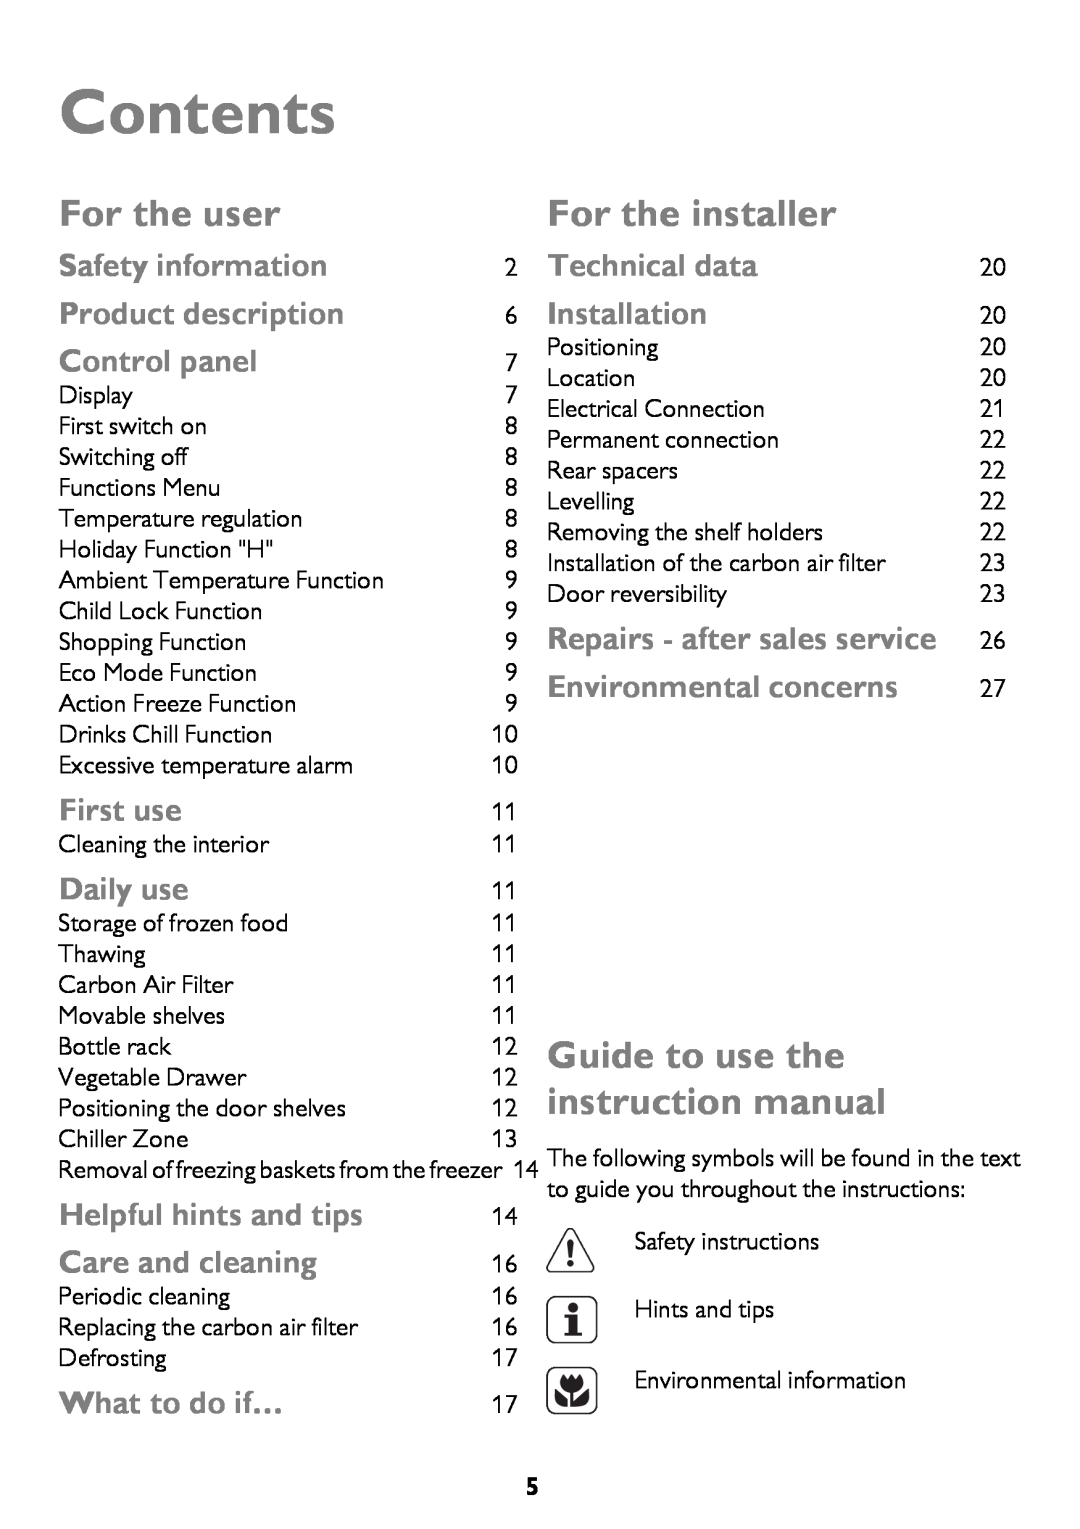 John Lewis JLSS1814, JLFFW2013, JLFFW1811 Contents, For the user, For the installer, Guide to use the, instruction manual 